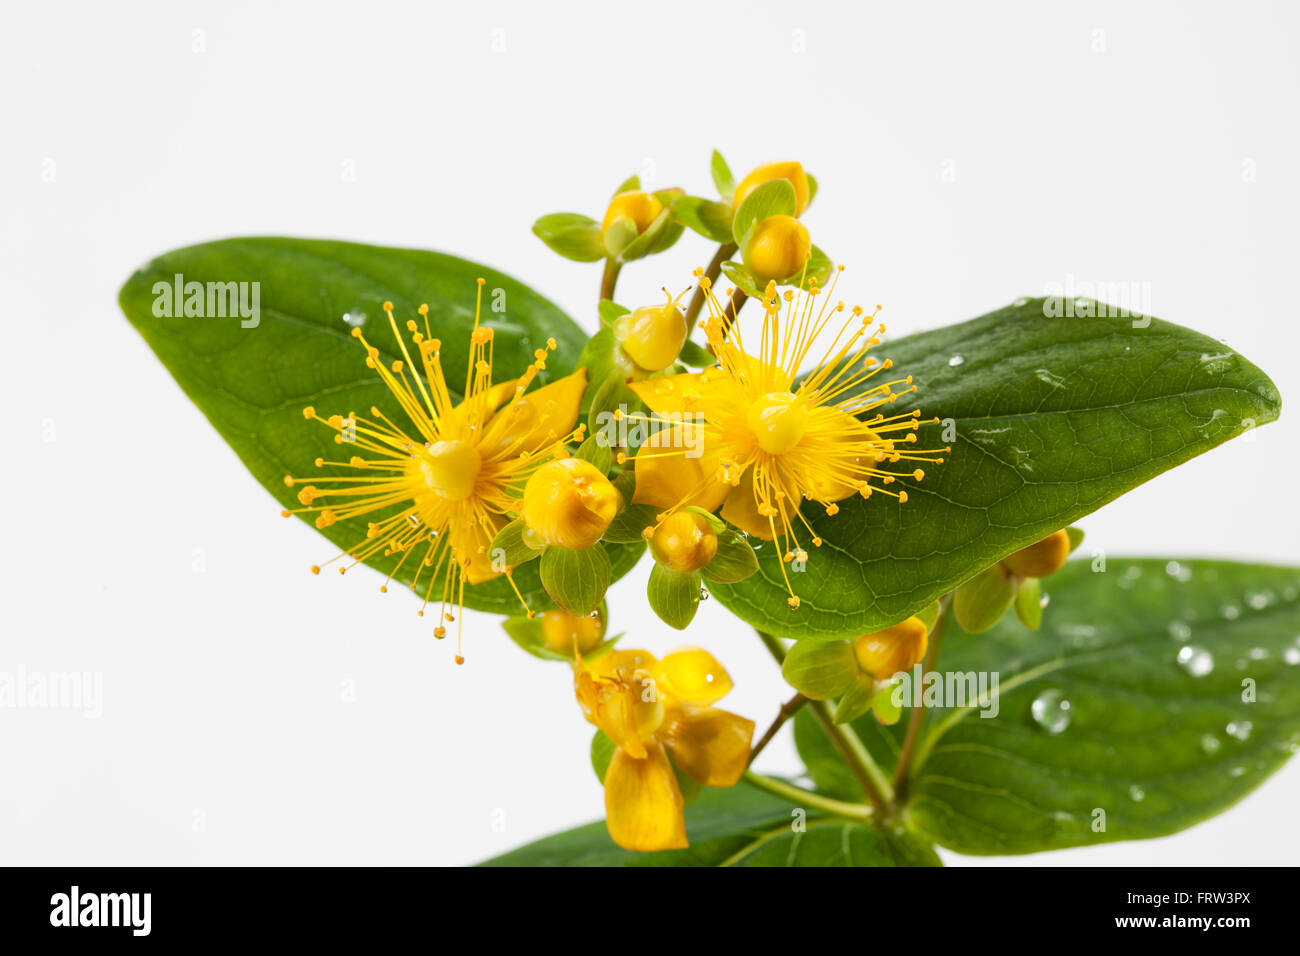 Wet perforate St John's-wort in front of white background, close-up Stock Photo